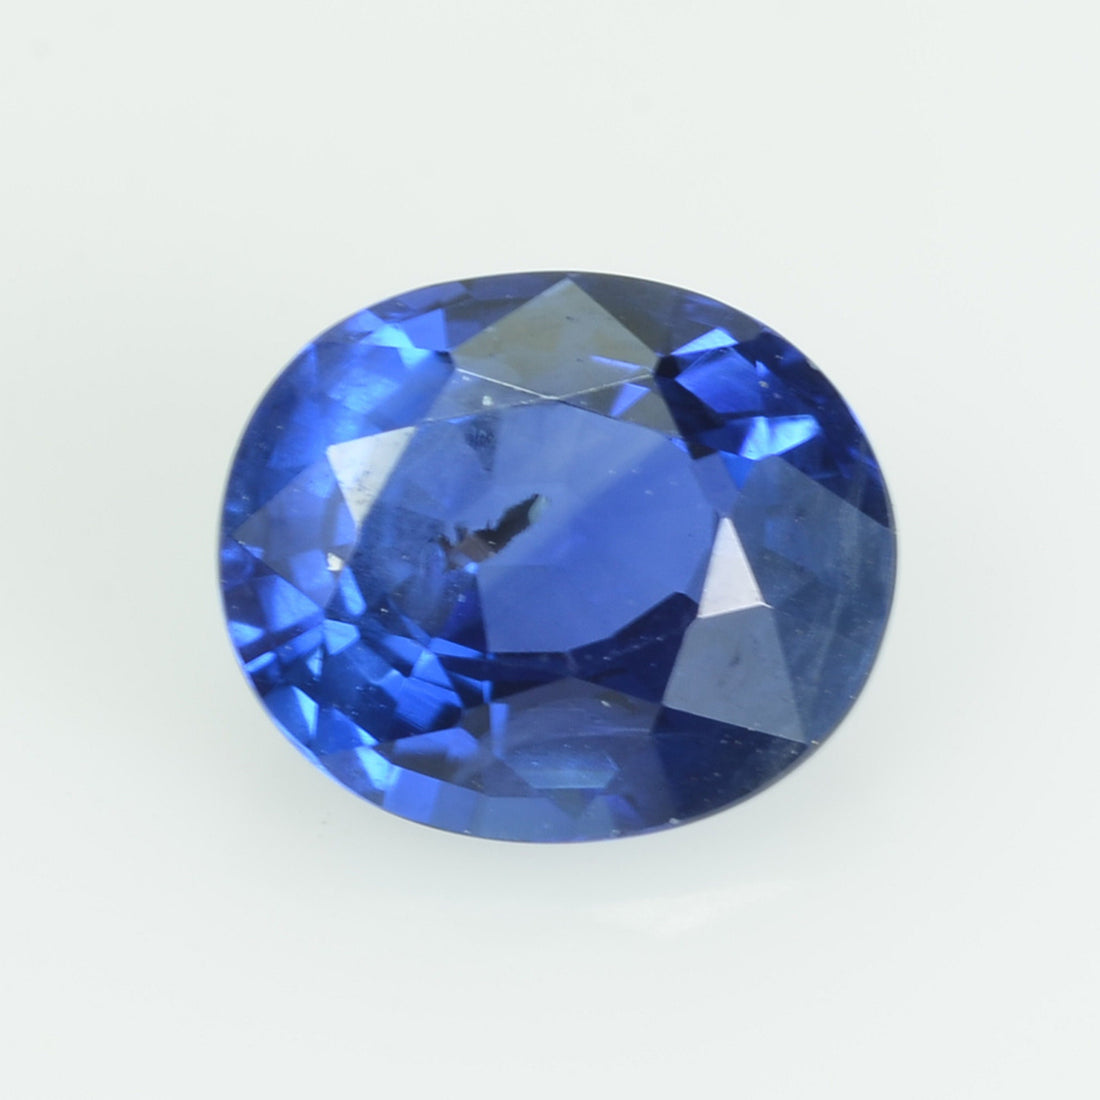 0.89 cts natural blue sapphire loose gemstone oval cut AGL Certified